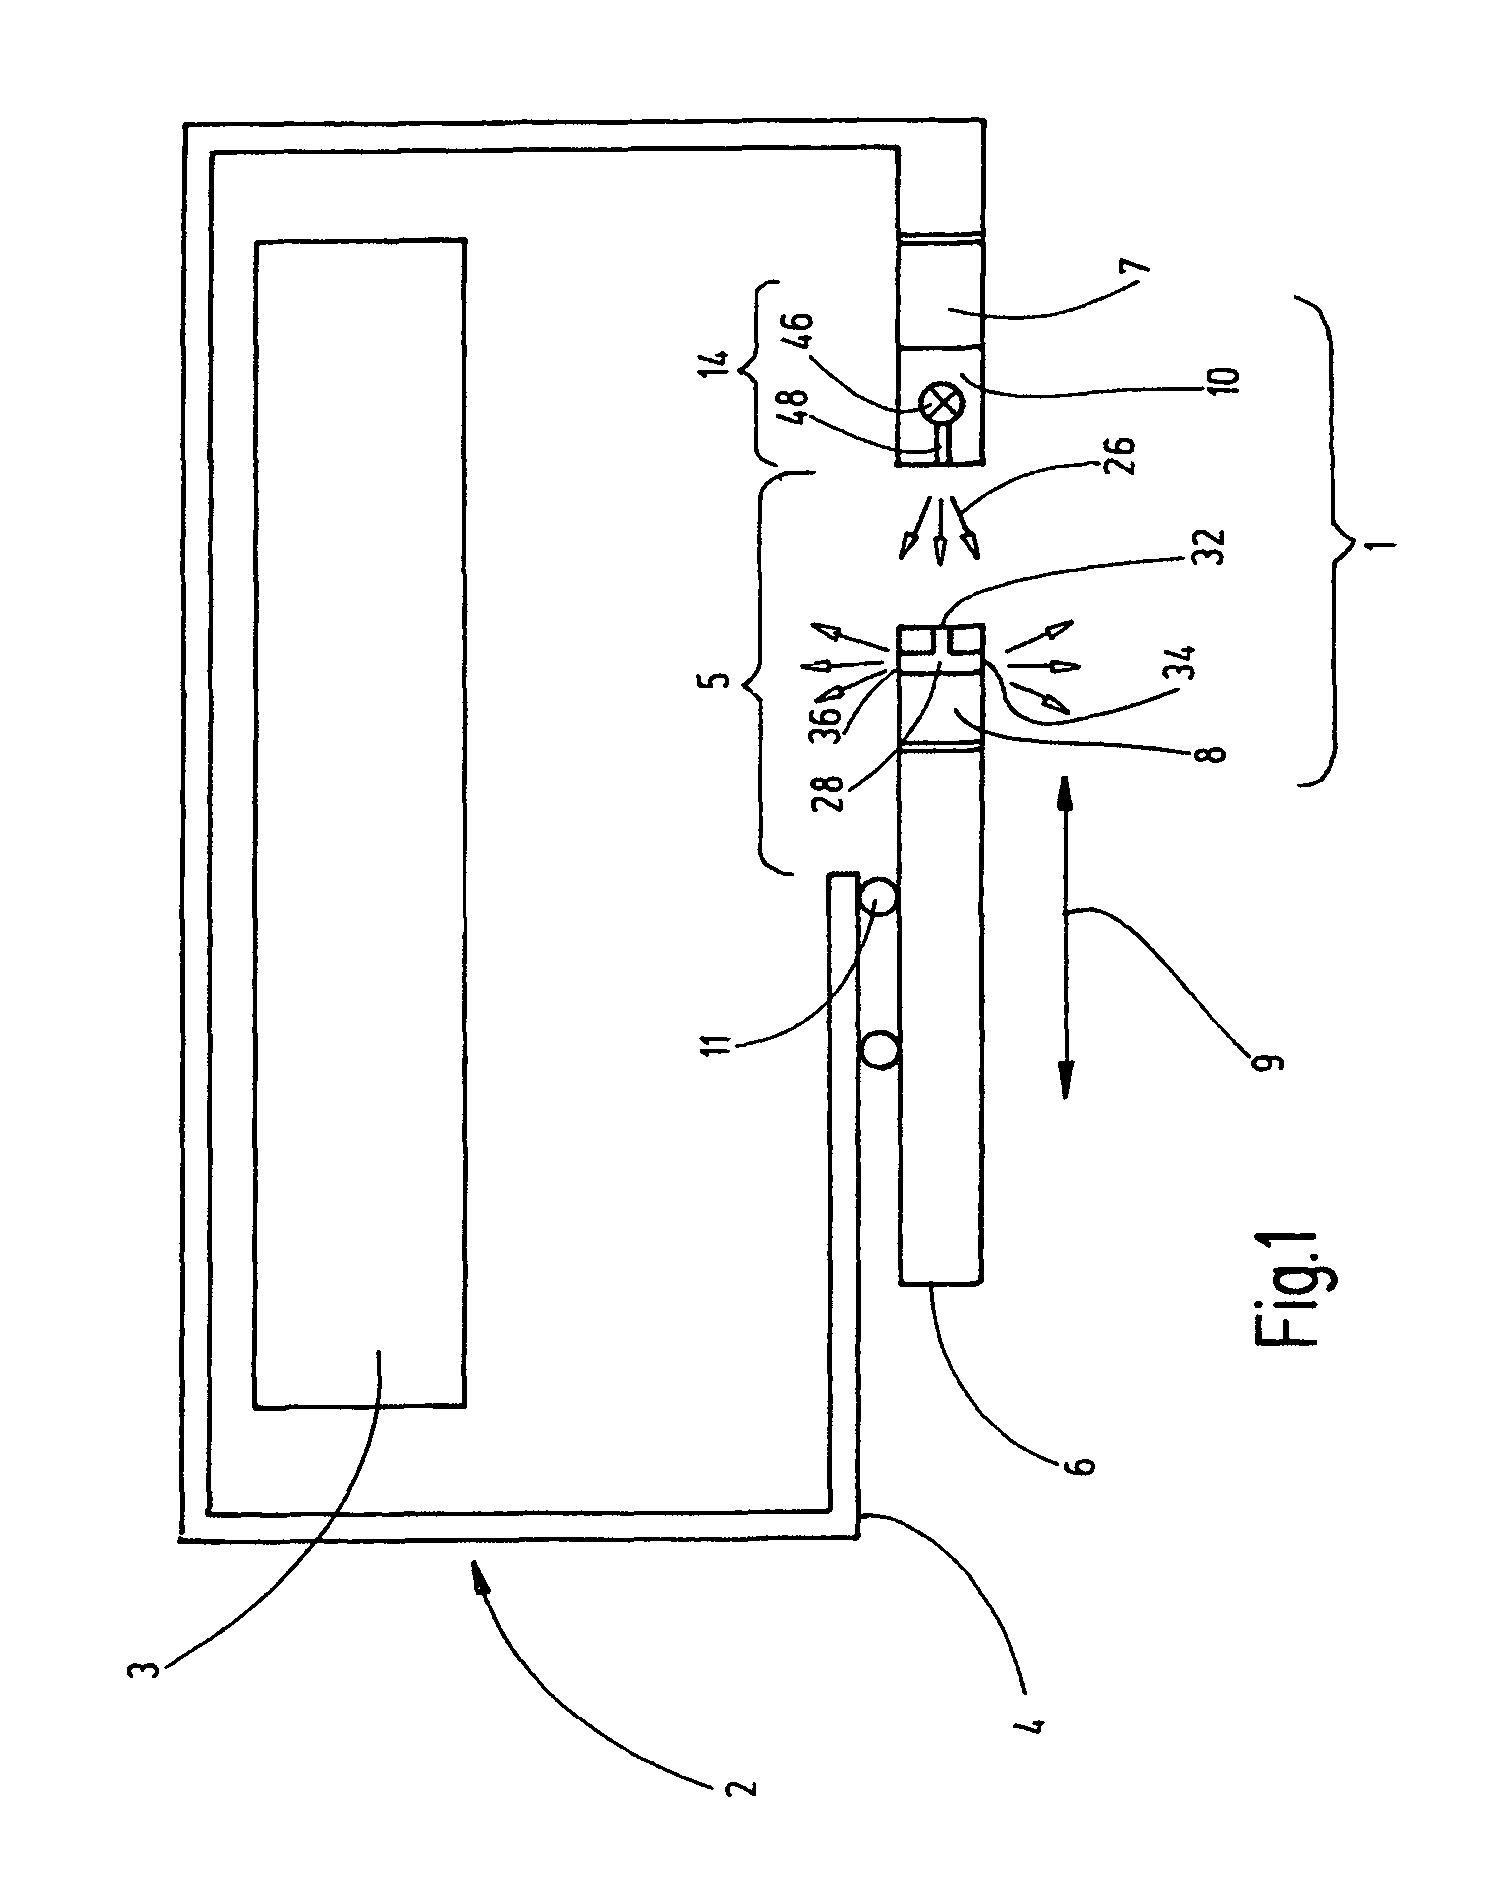 Device for monitoring the state of a system